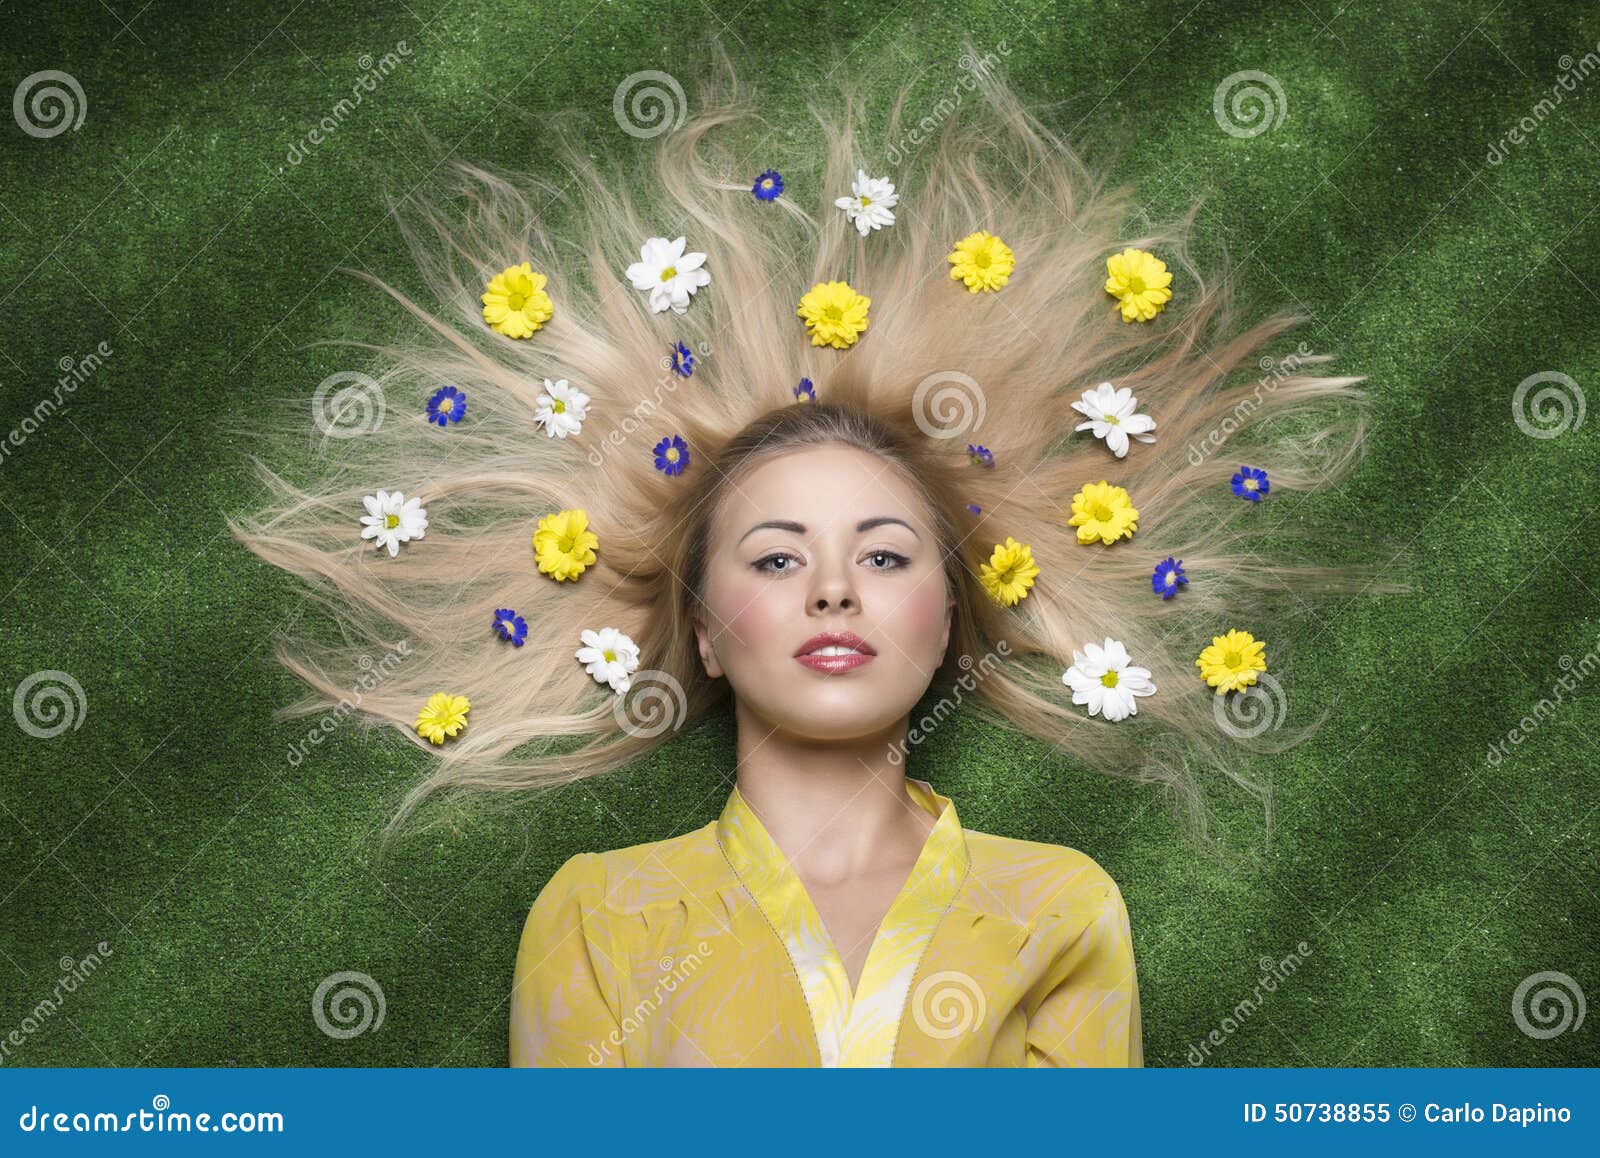 Blonde woman with flowers in her hair - wide 2